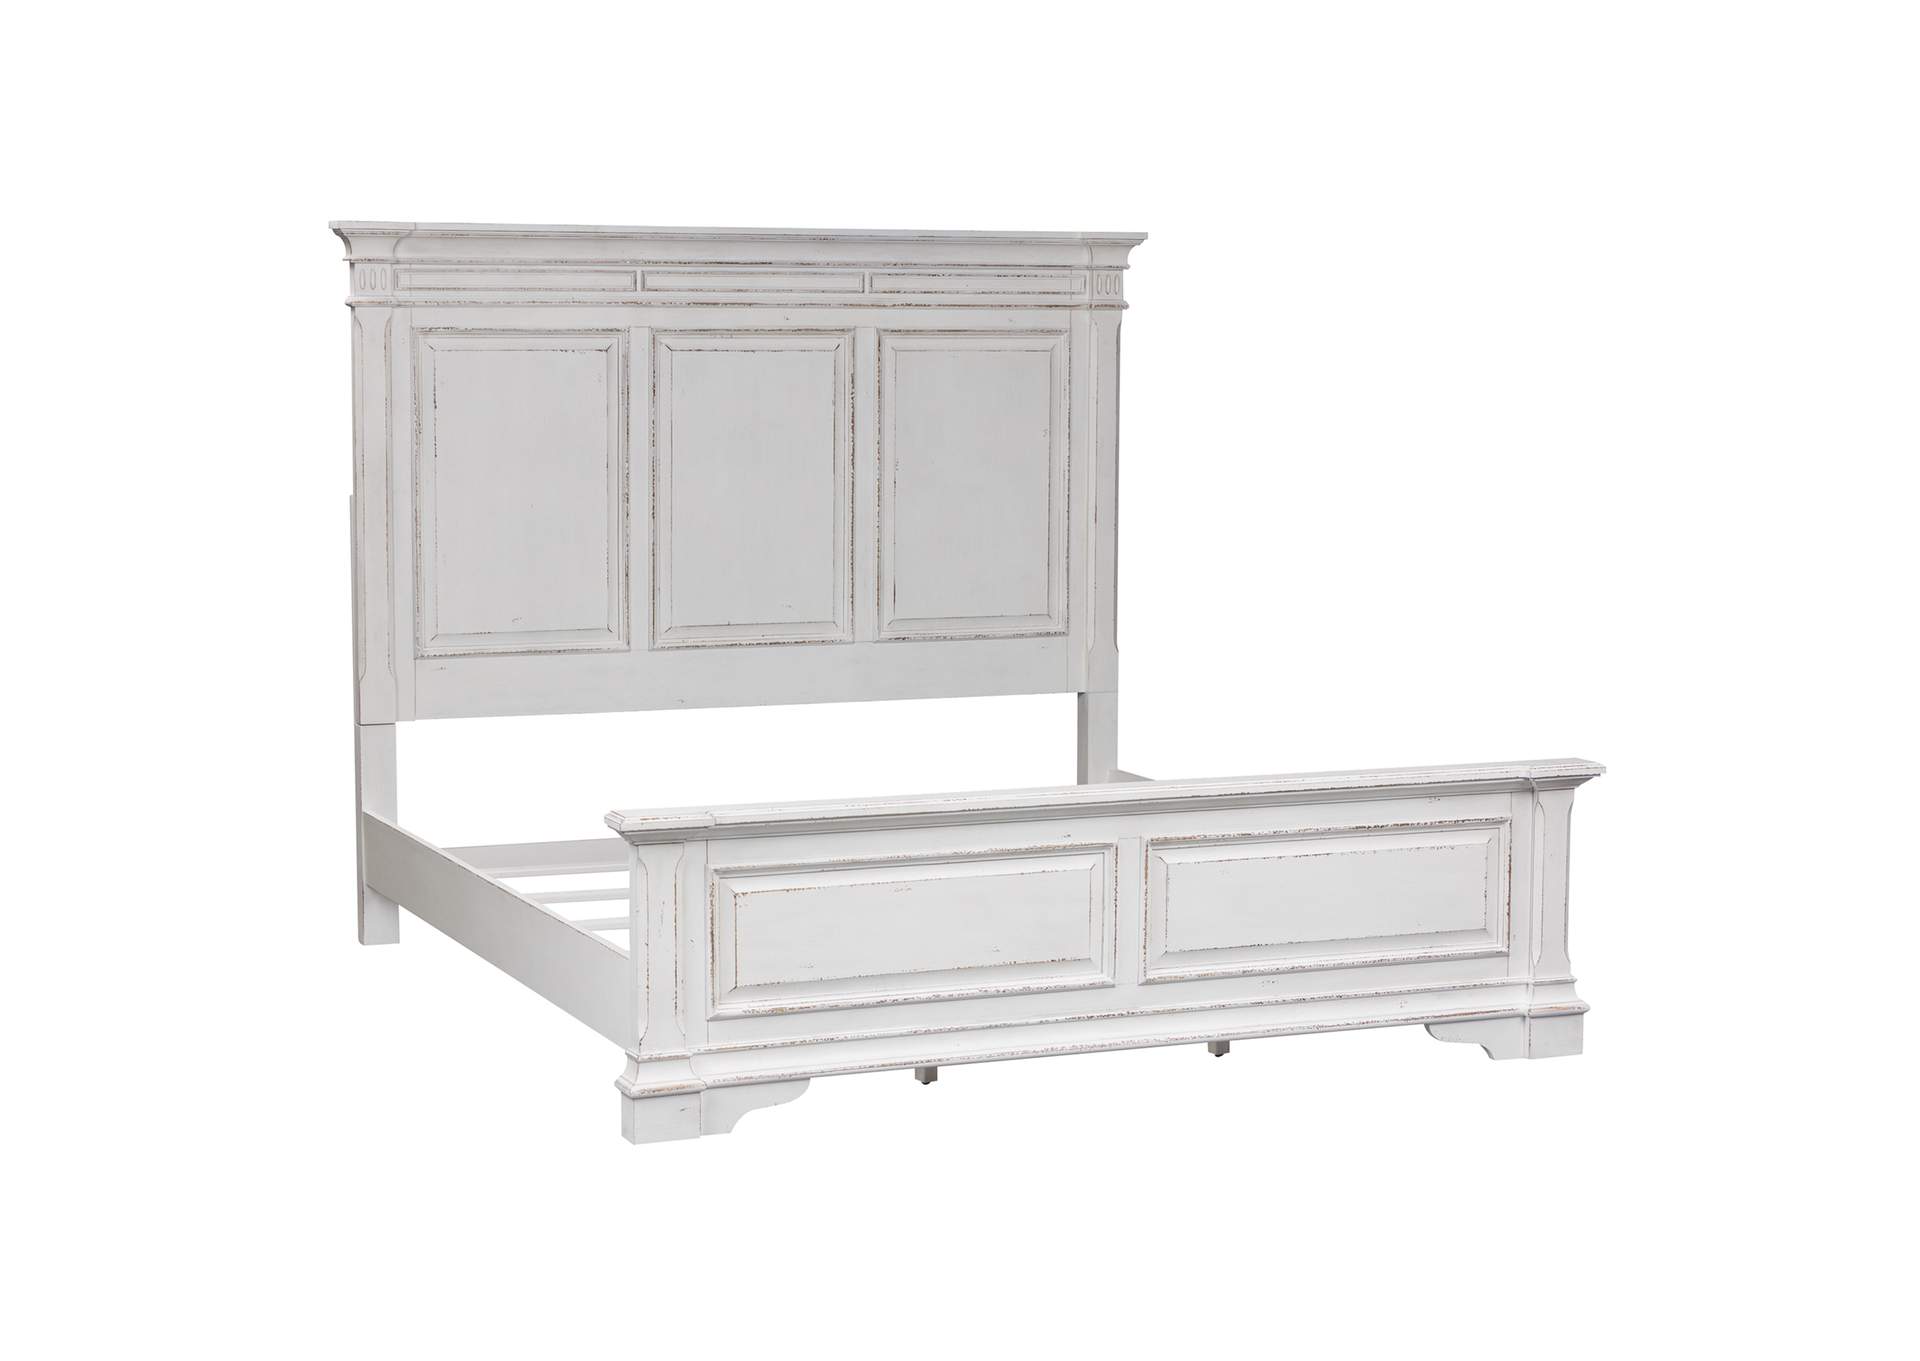 Abbey Park King Panel Bed,Liberty